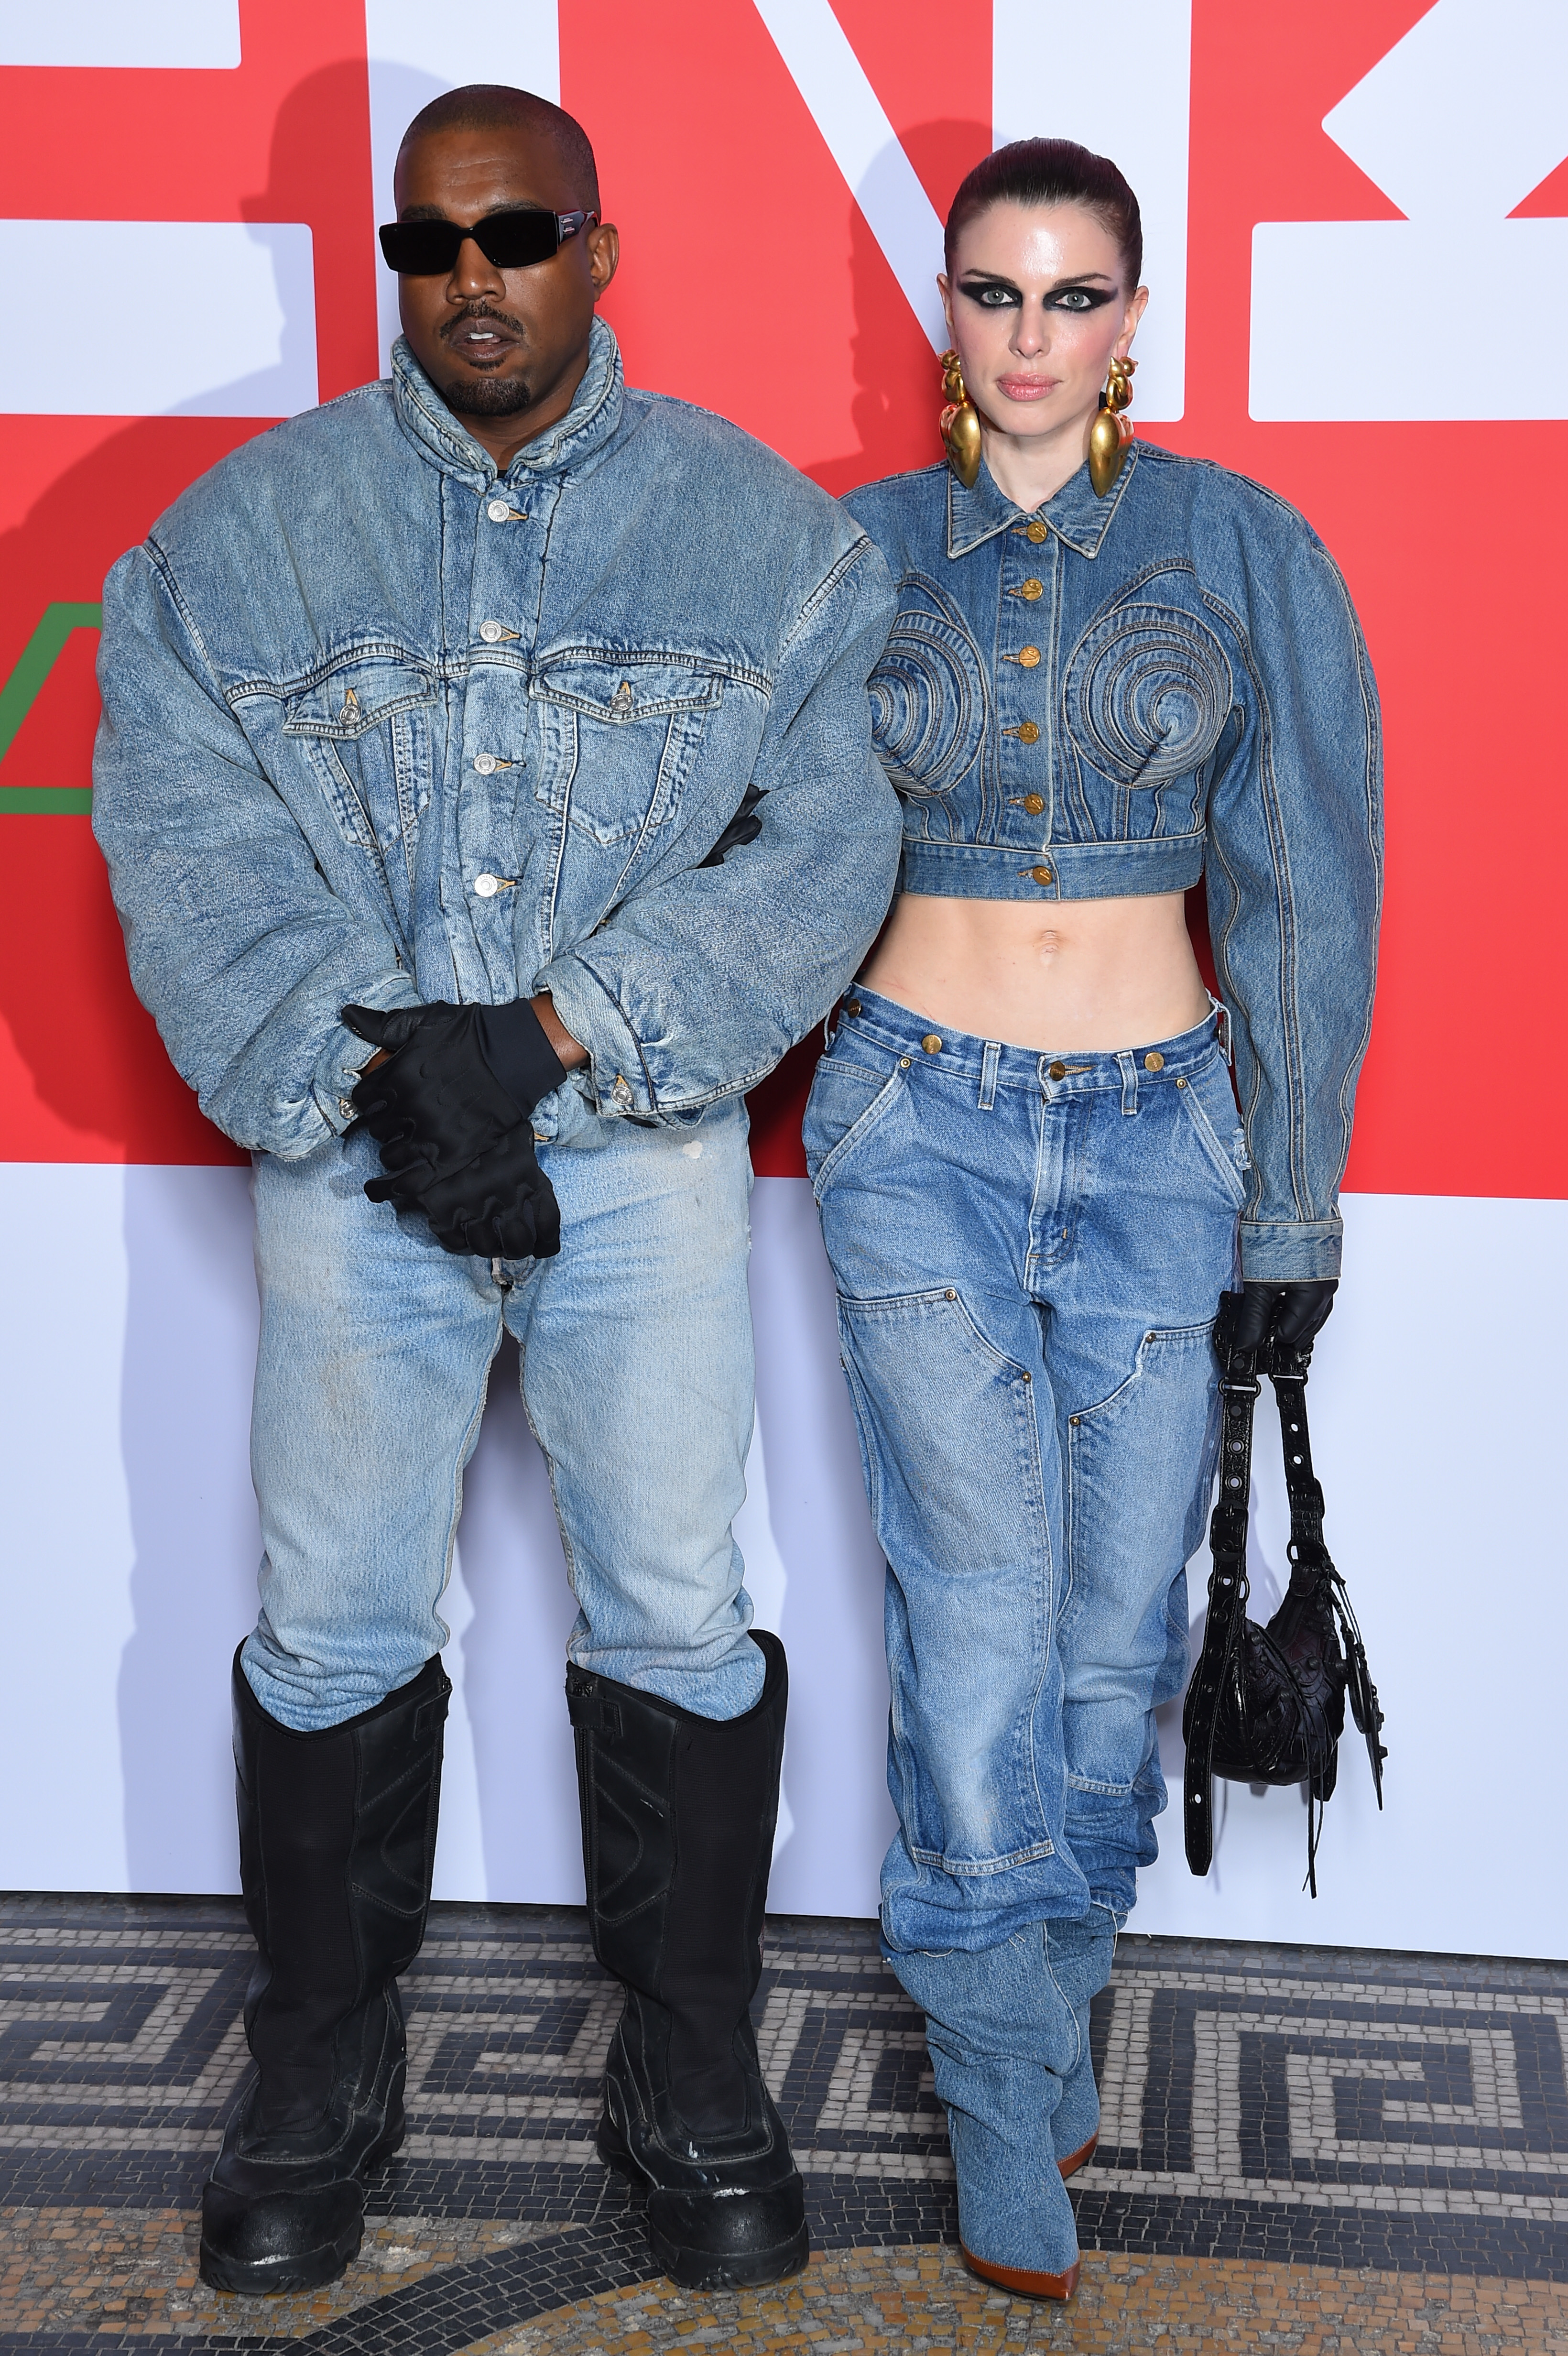 kanye and julia wearing denim outfits at an event